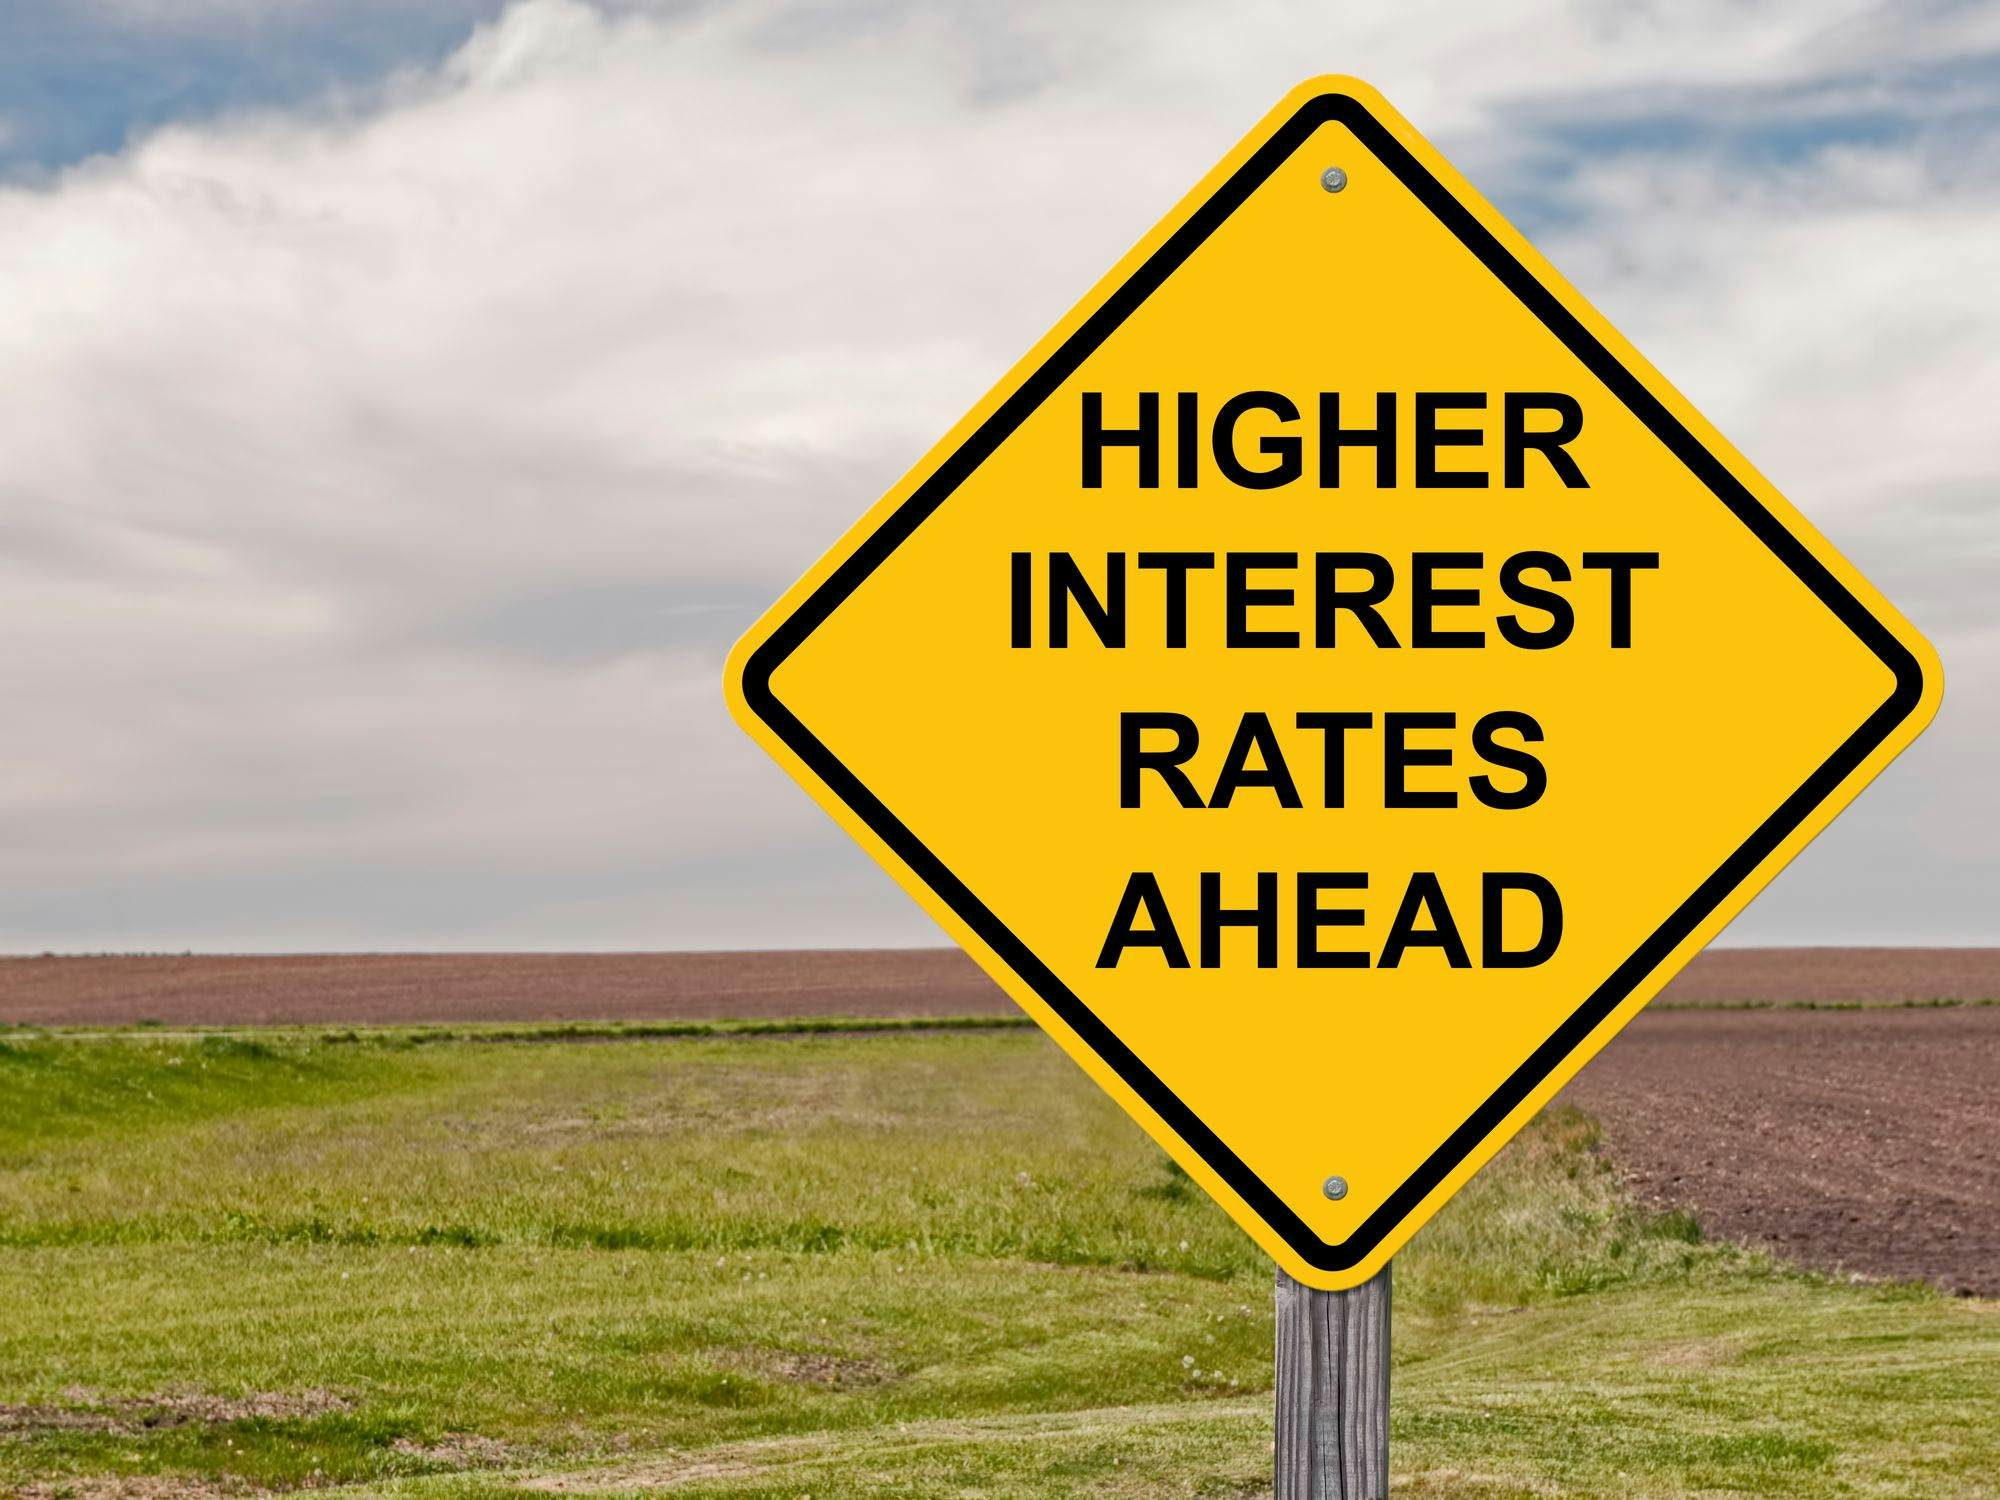 How to Position Portfolios for Rate Hikes